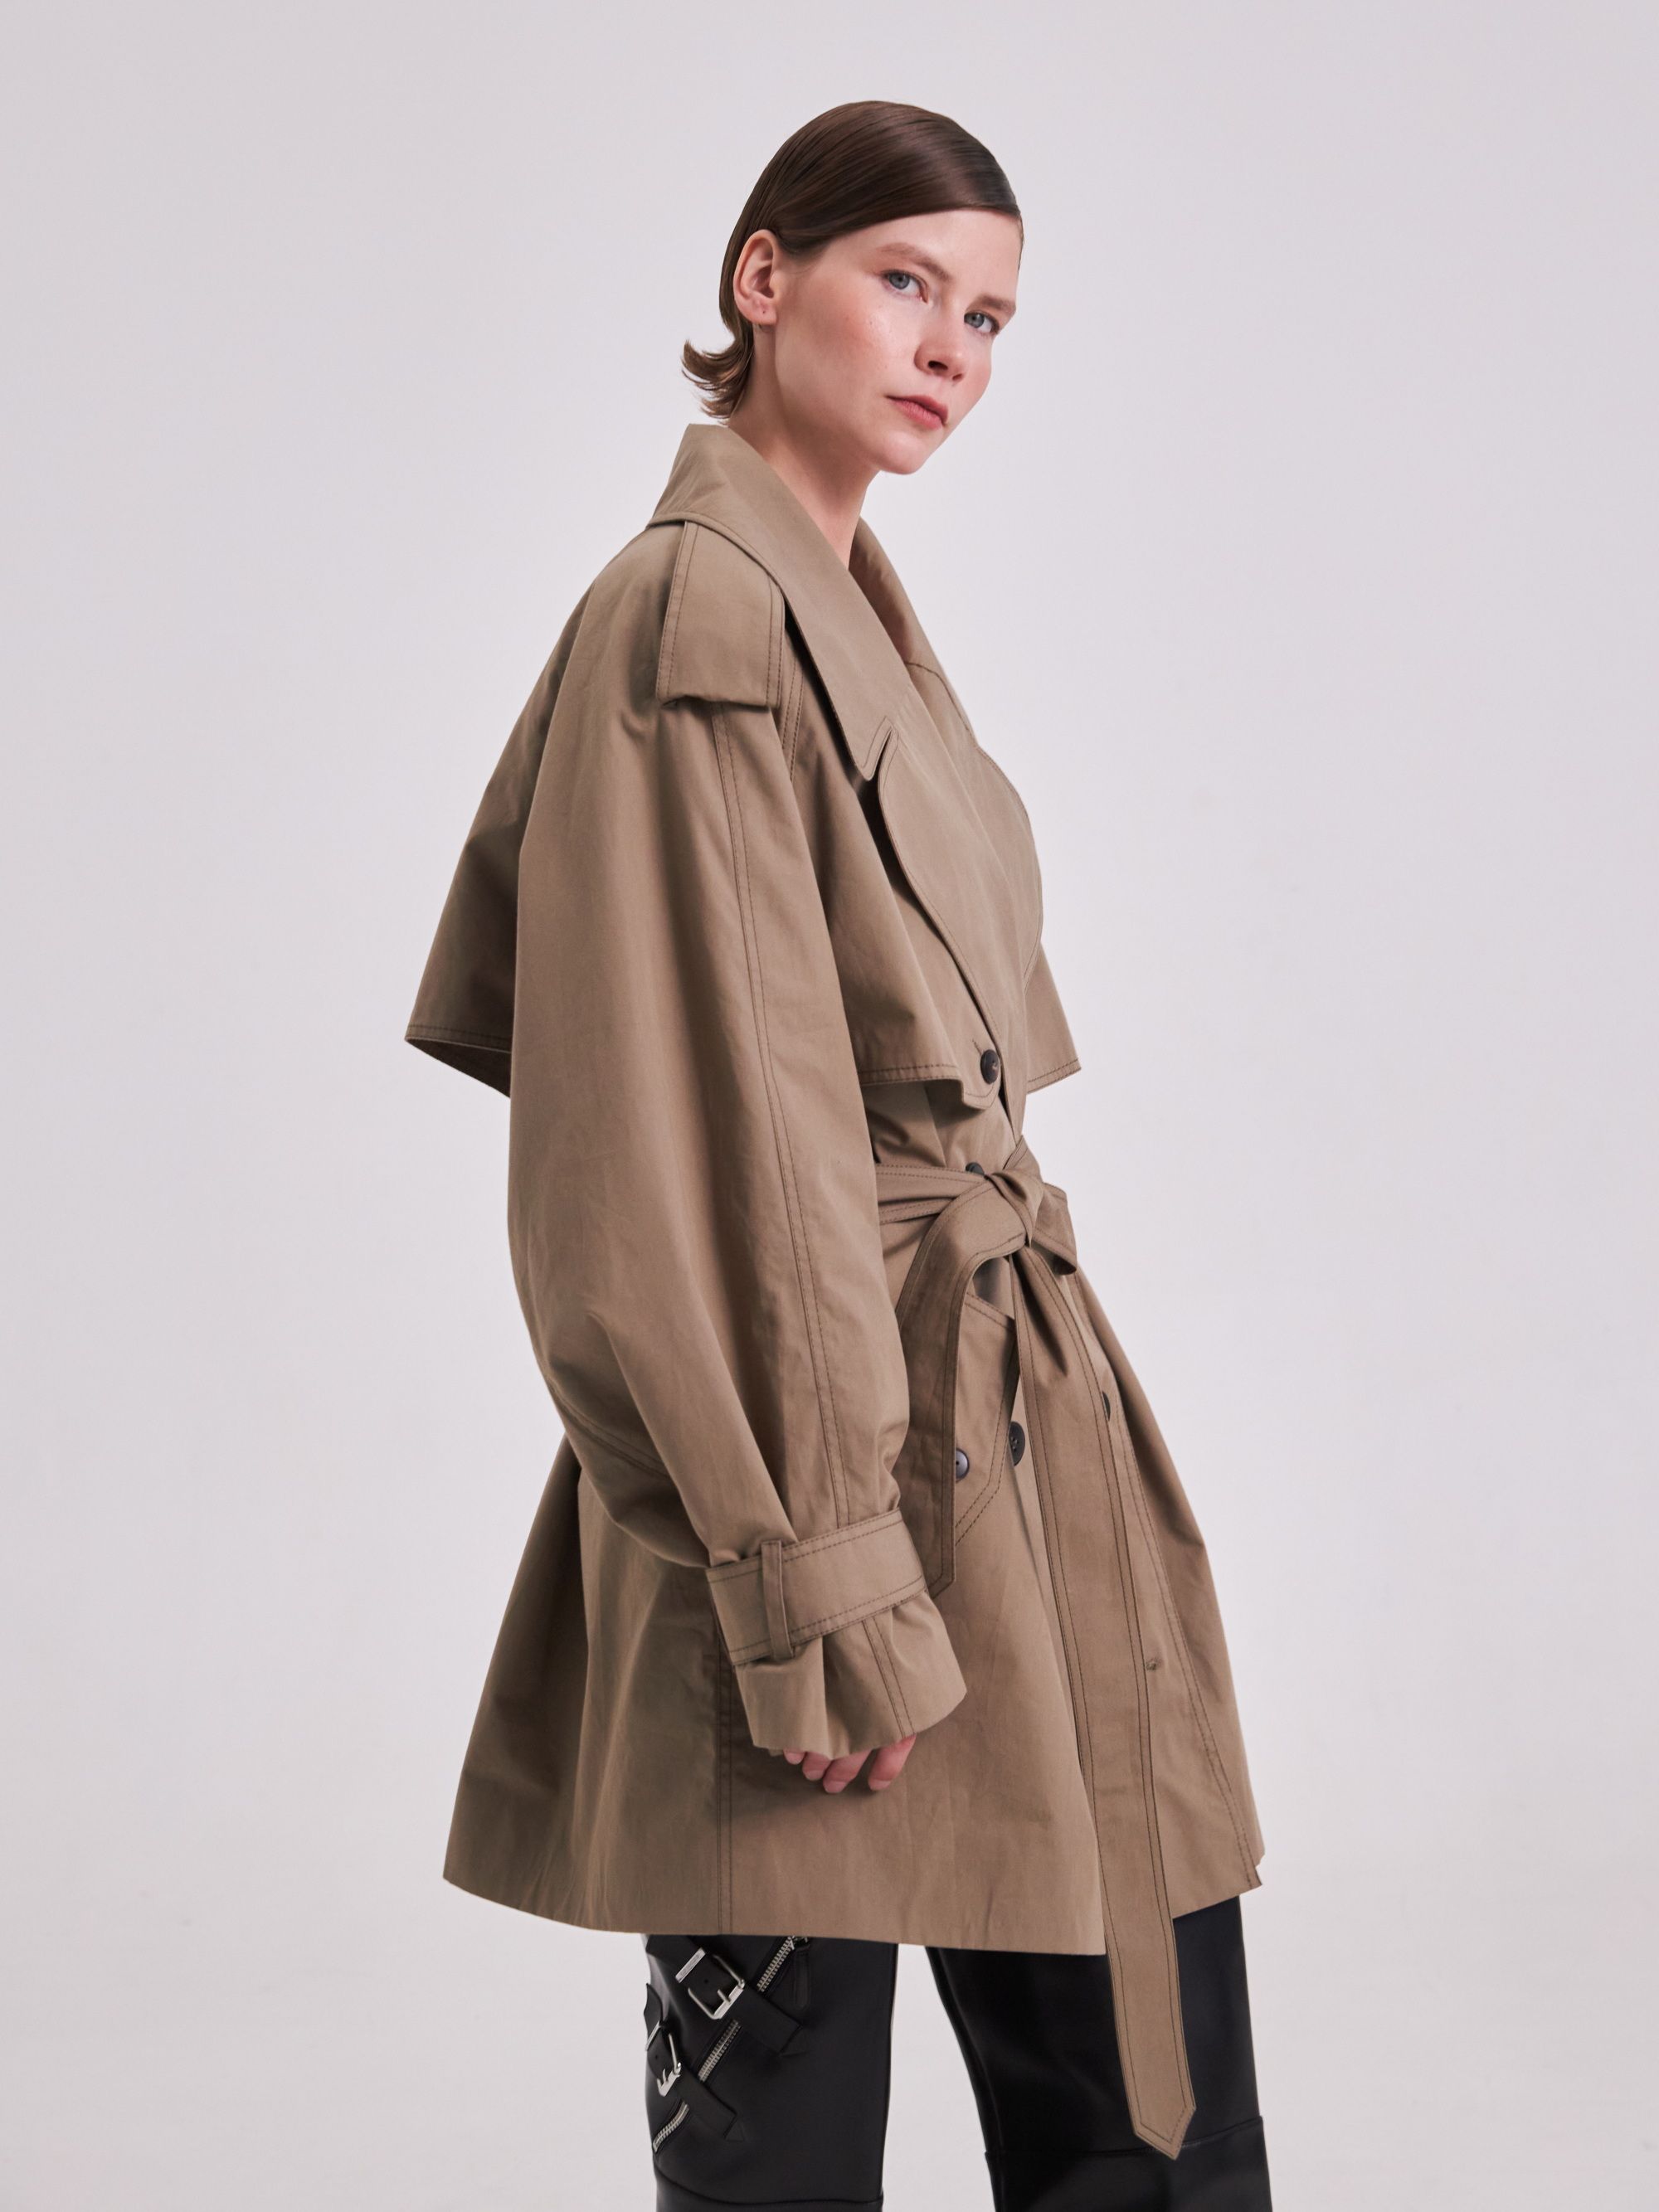 Trench coat, pattern №1061 buy on-line